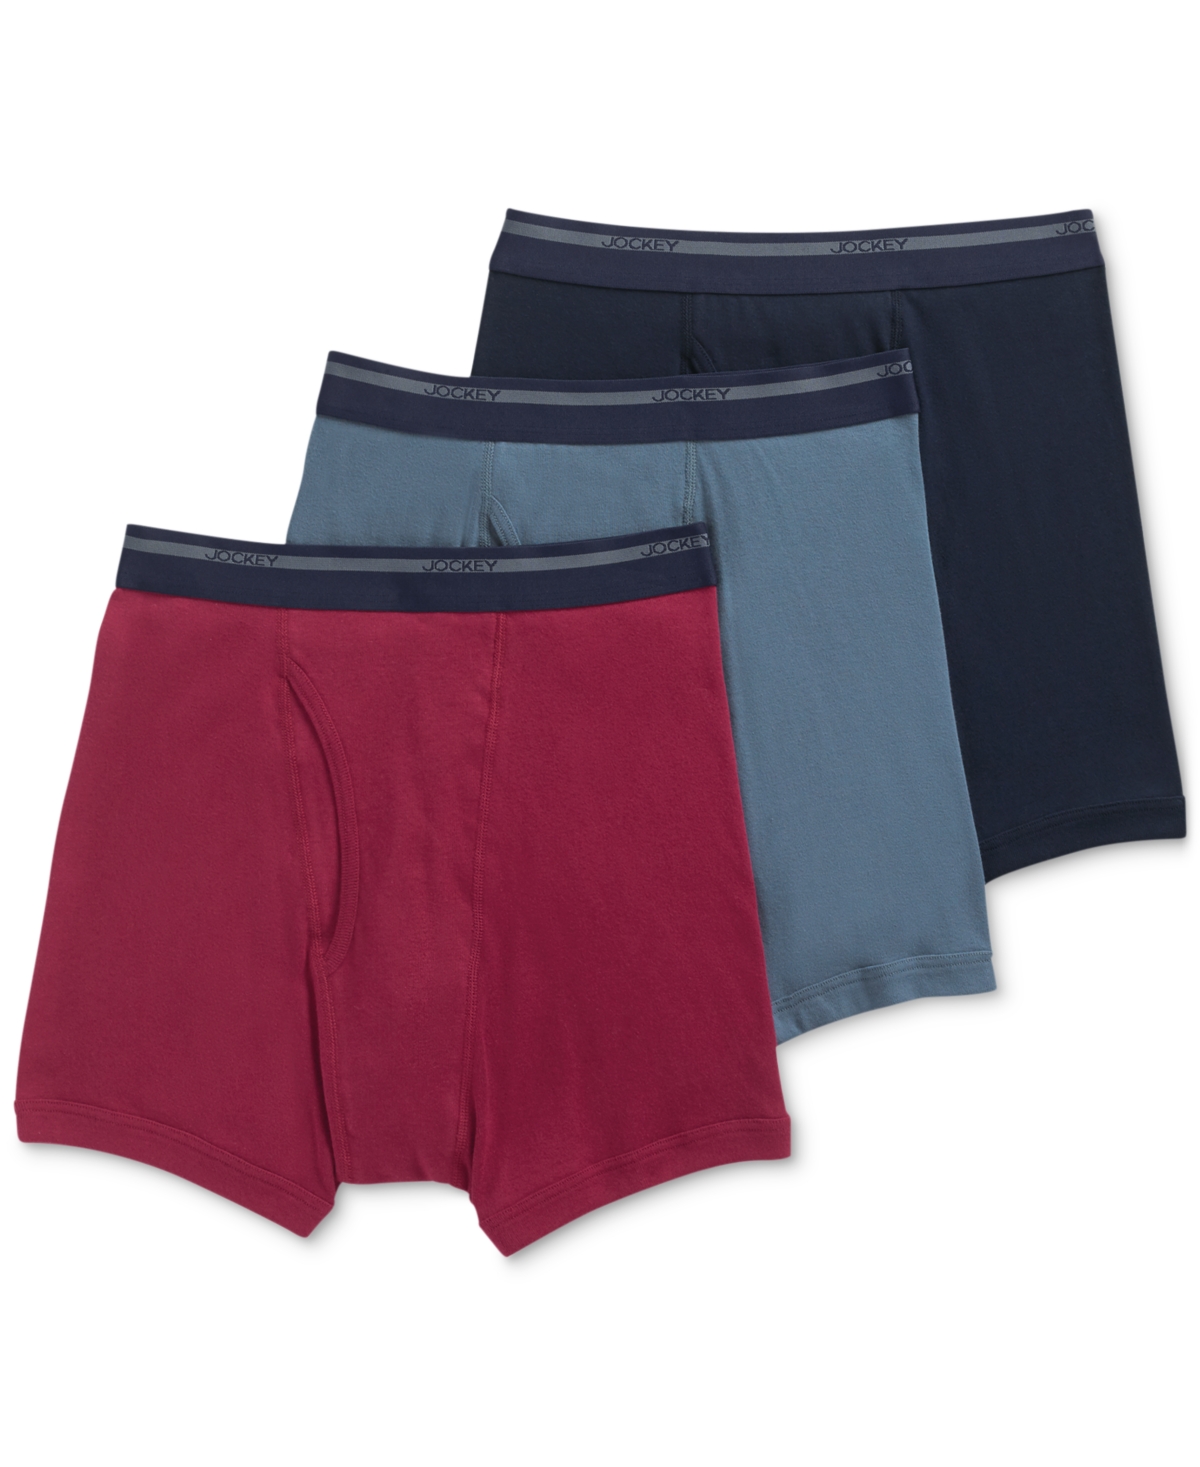 Jockey Men's Classic 3 Pack Cotton Boxer Briefs In Red,blue Assorted